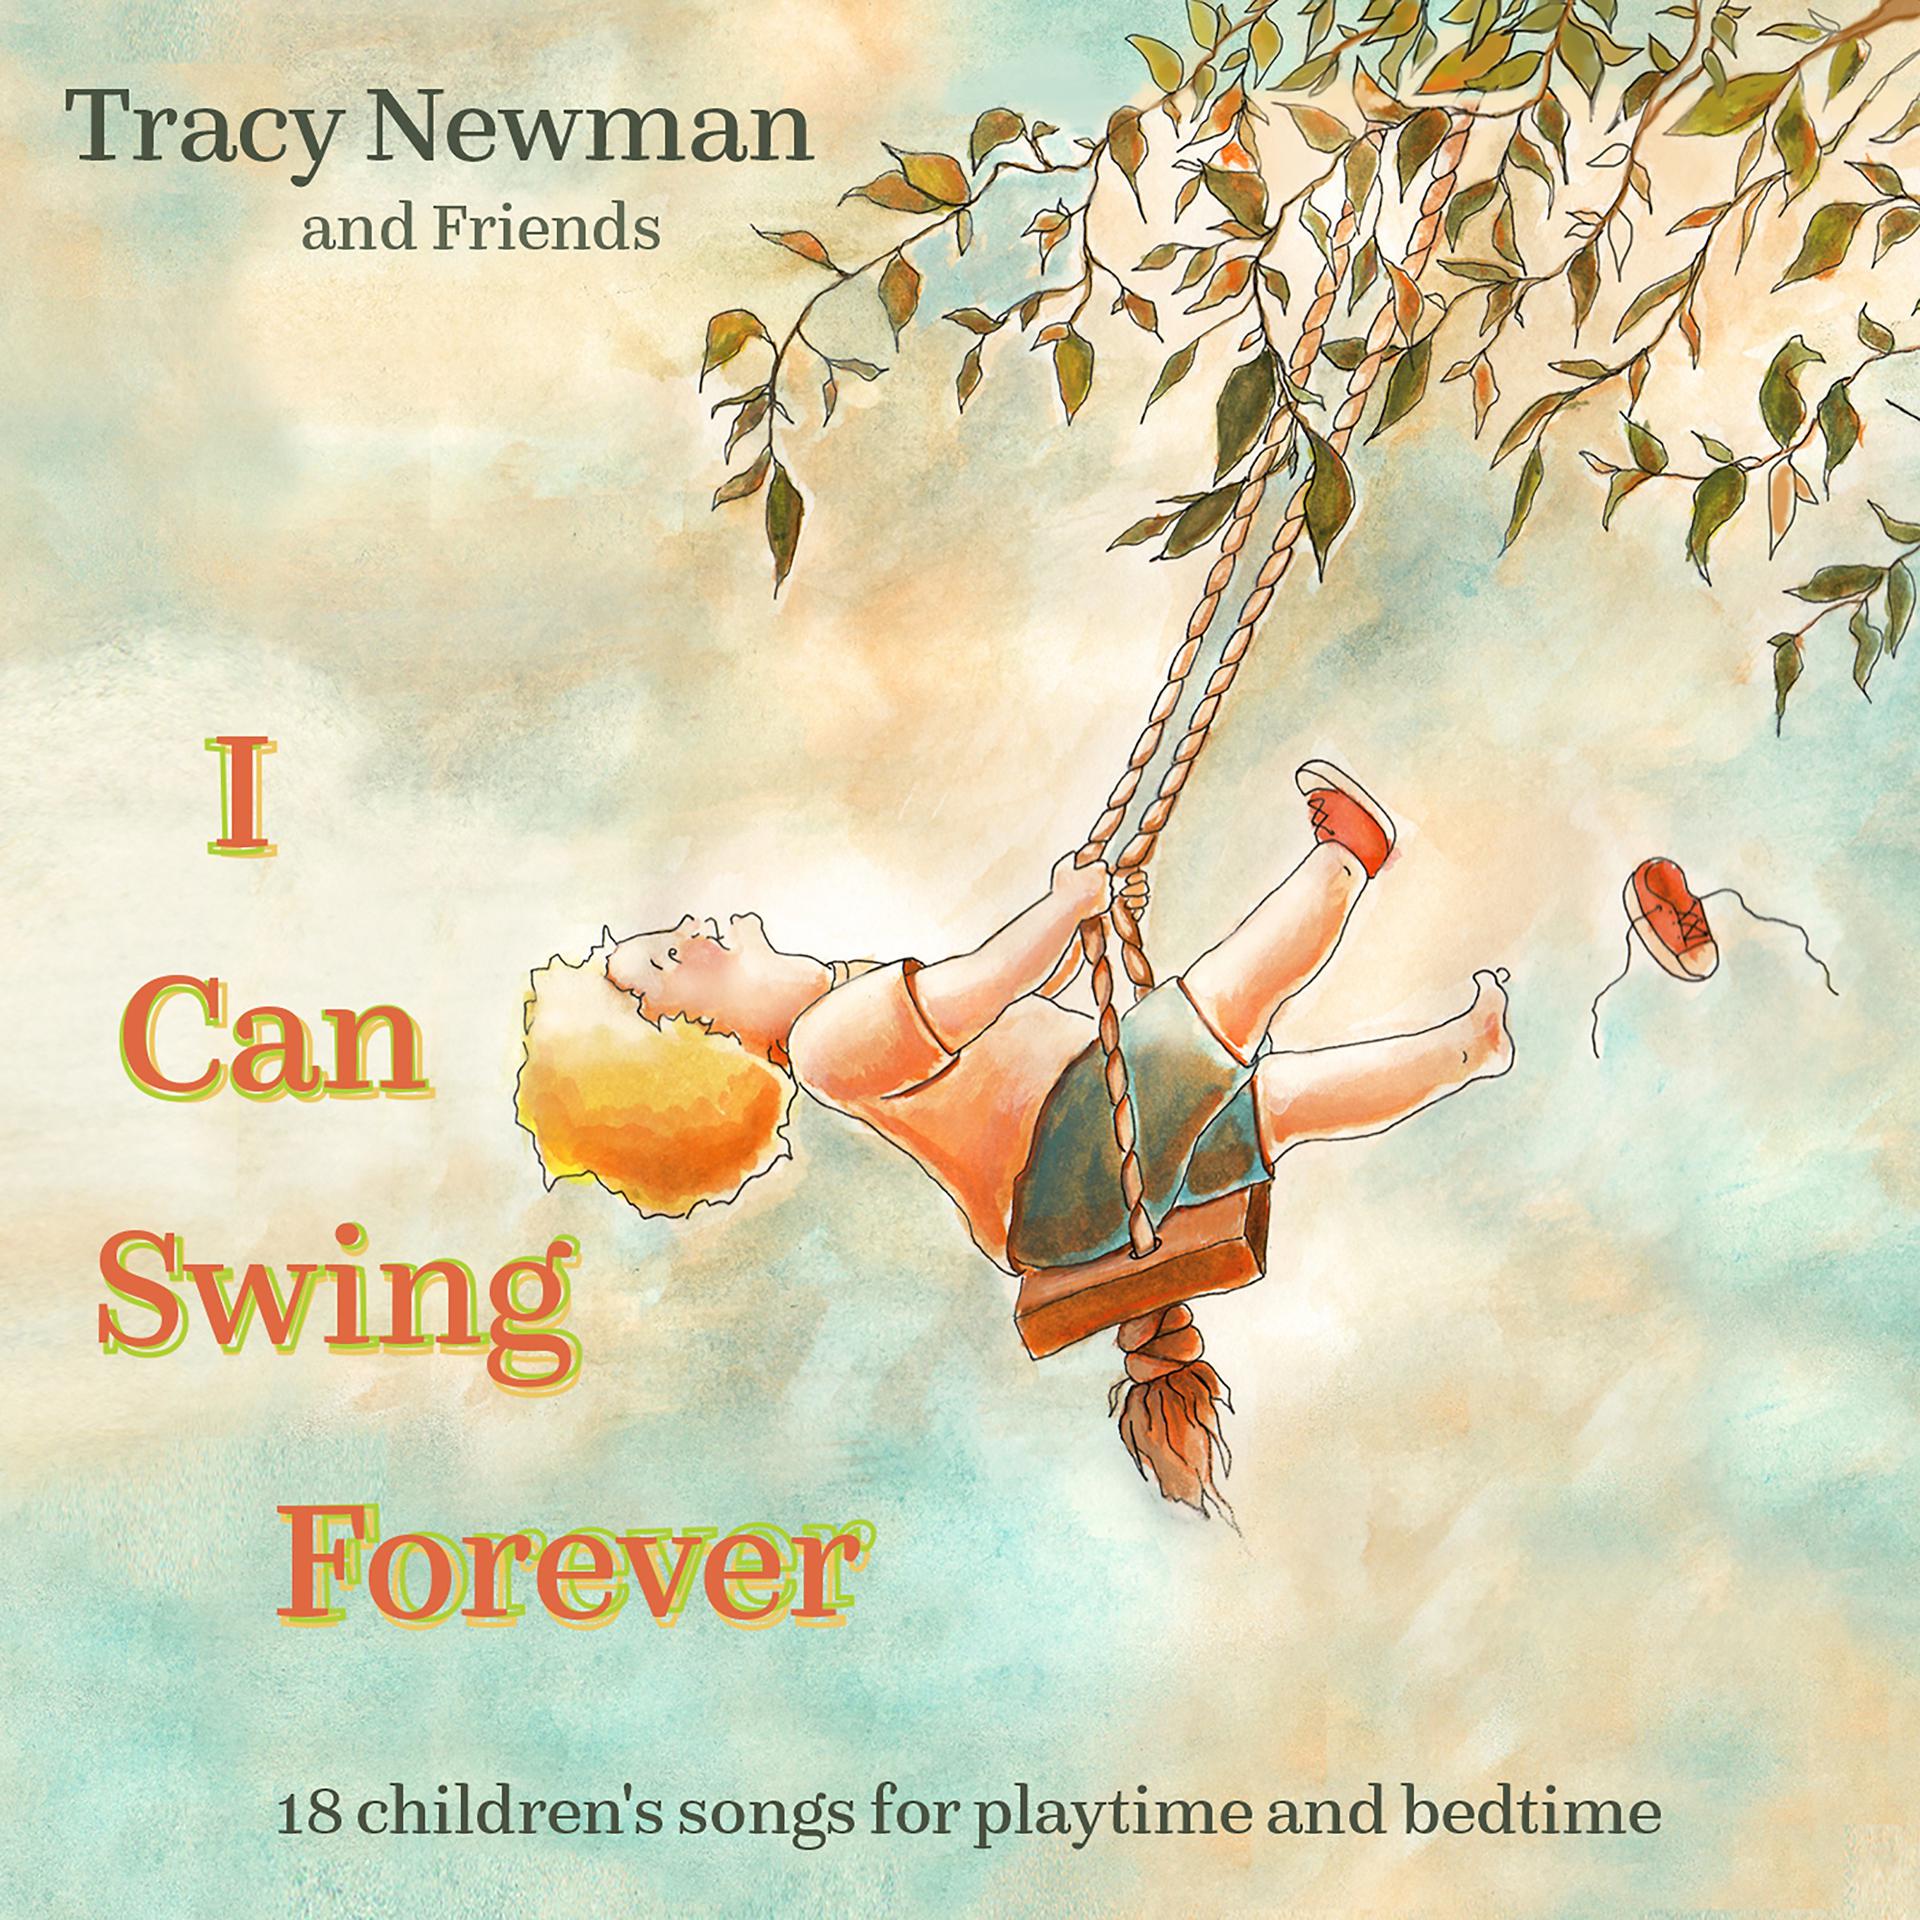 Can Swing. Life is a Journey качели. Life is a Journey качели Оман. I can swing